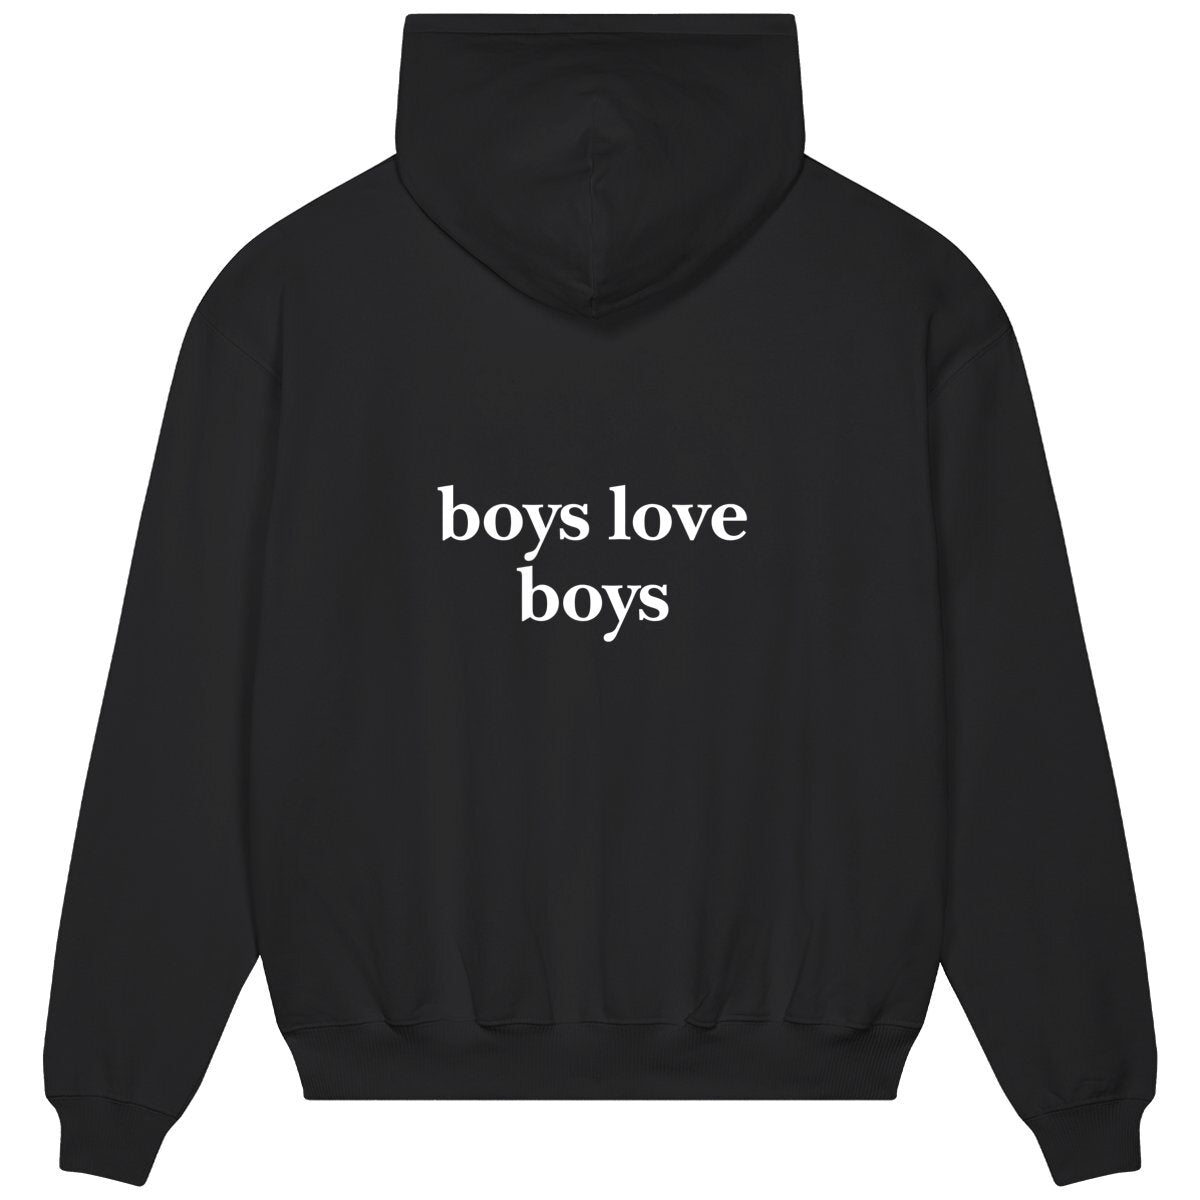 boys love boys hoodie over. garçon garçon essentiel black oversized hoodie. Encapsulate effortless Parisian cool with this hoodie, its subtle 'boys love boys ON THE BACK' emblem whispering understated sophistication. Crafted for comfort, styled for streets of Paris.